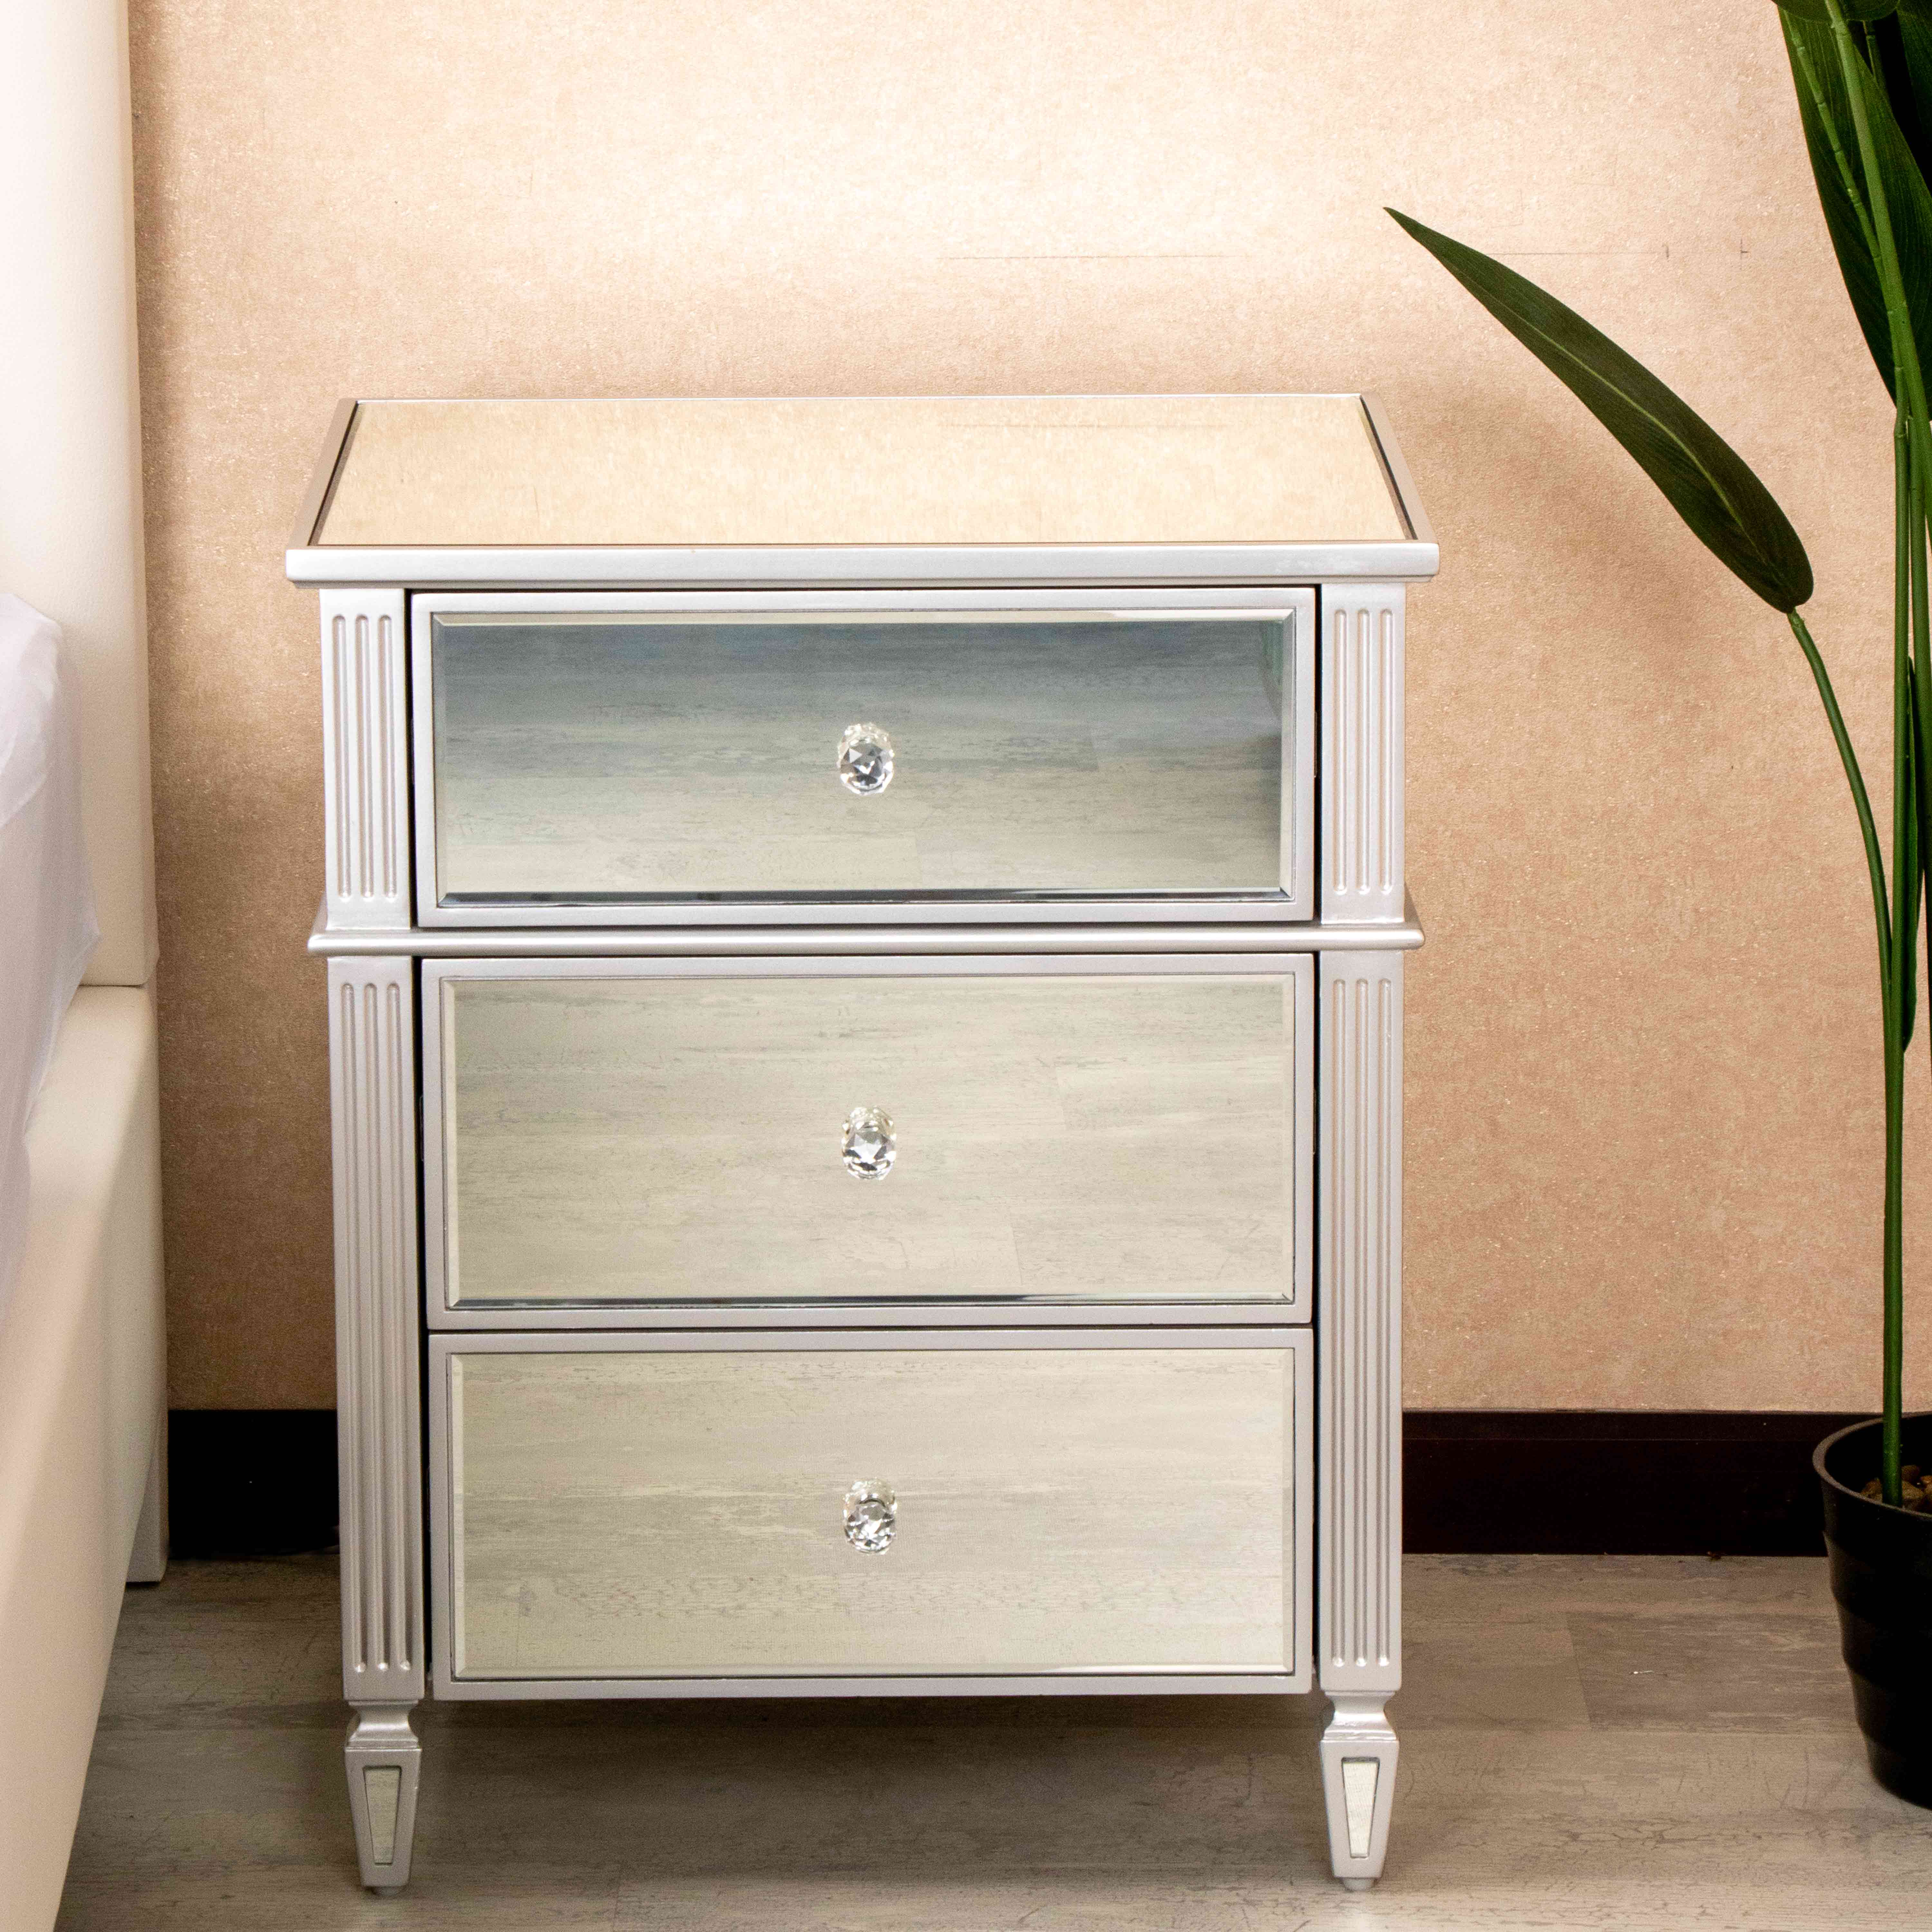 KFC1180HB 3D BEDSIDE TABLE CLEAR XY-052